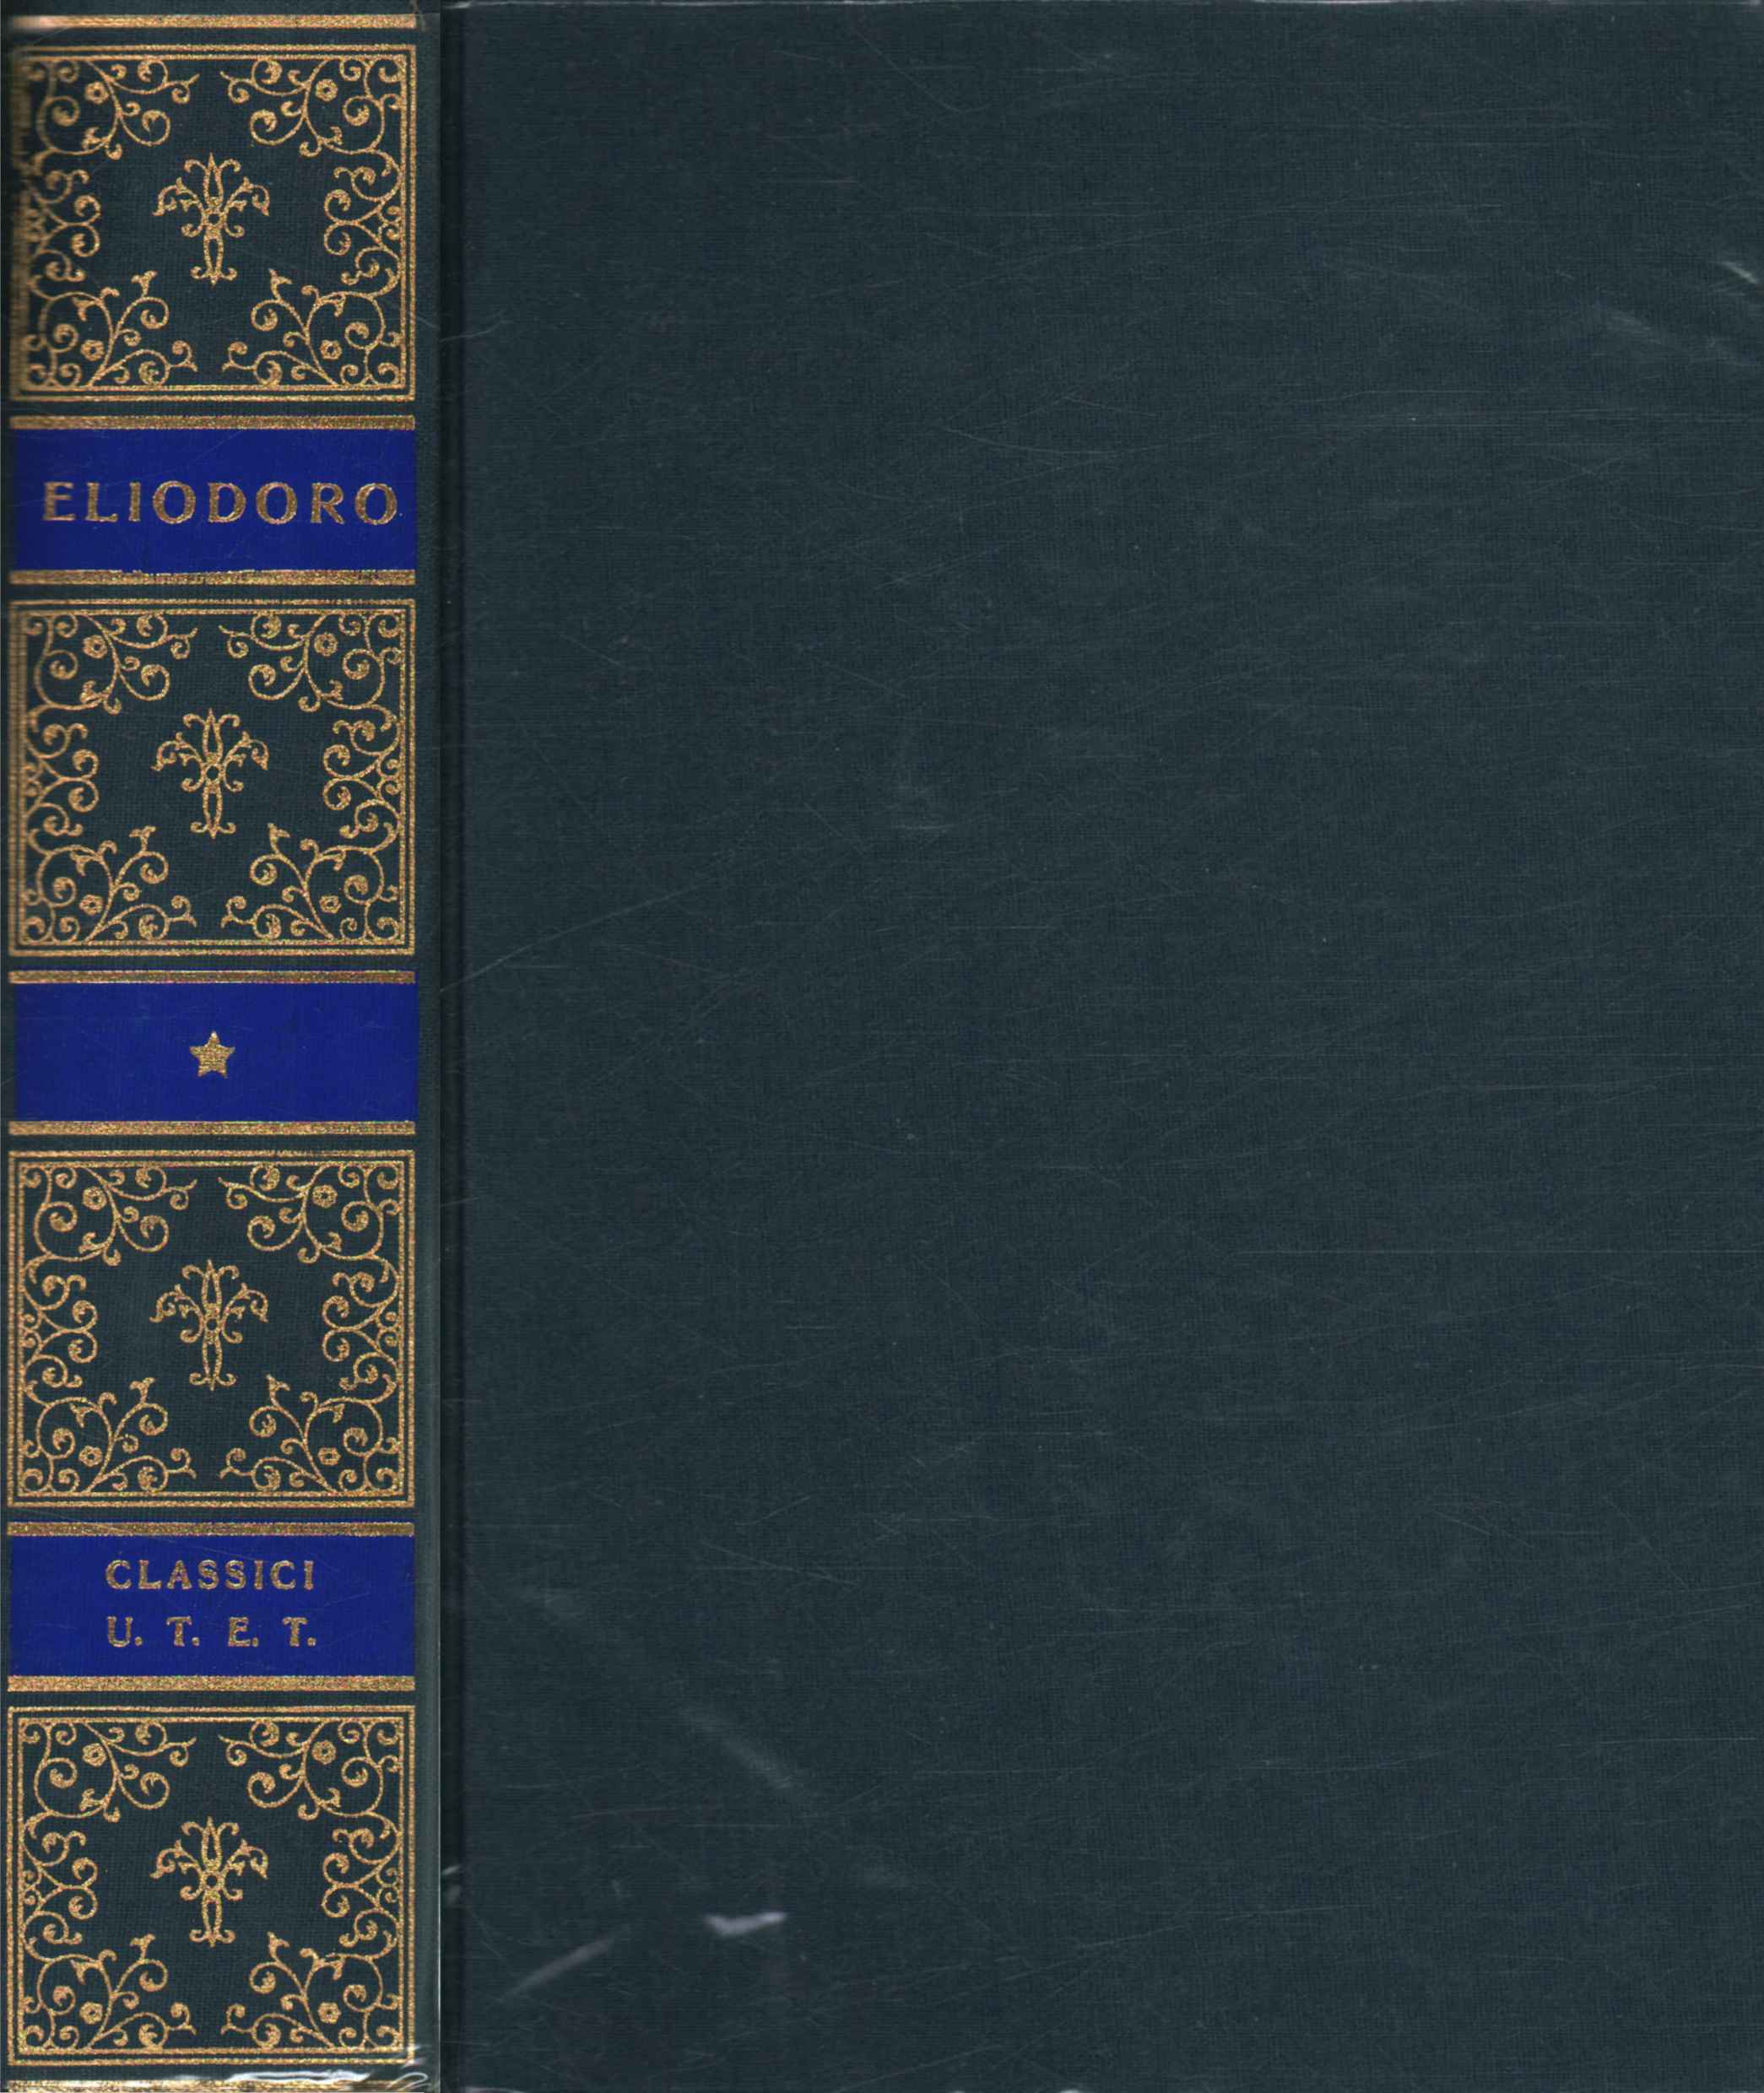 The Ethiopians  Heliodorus used Classical Greek and Latin Fiction